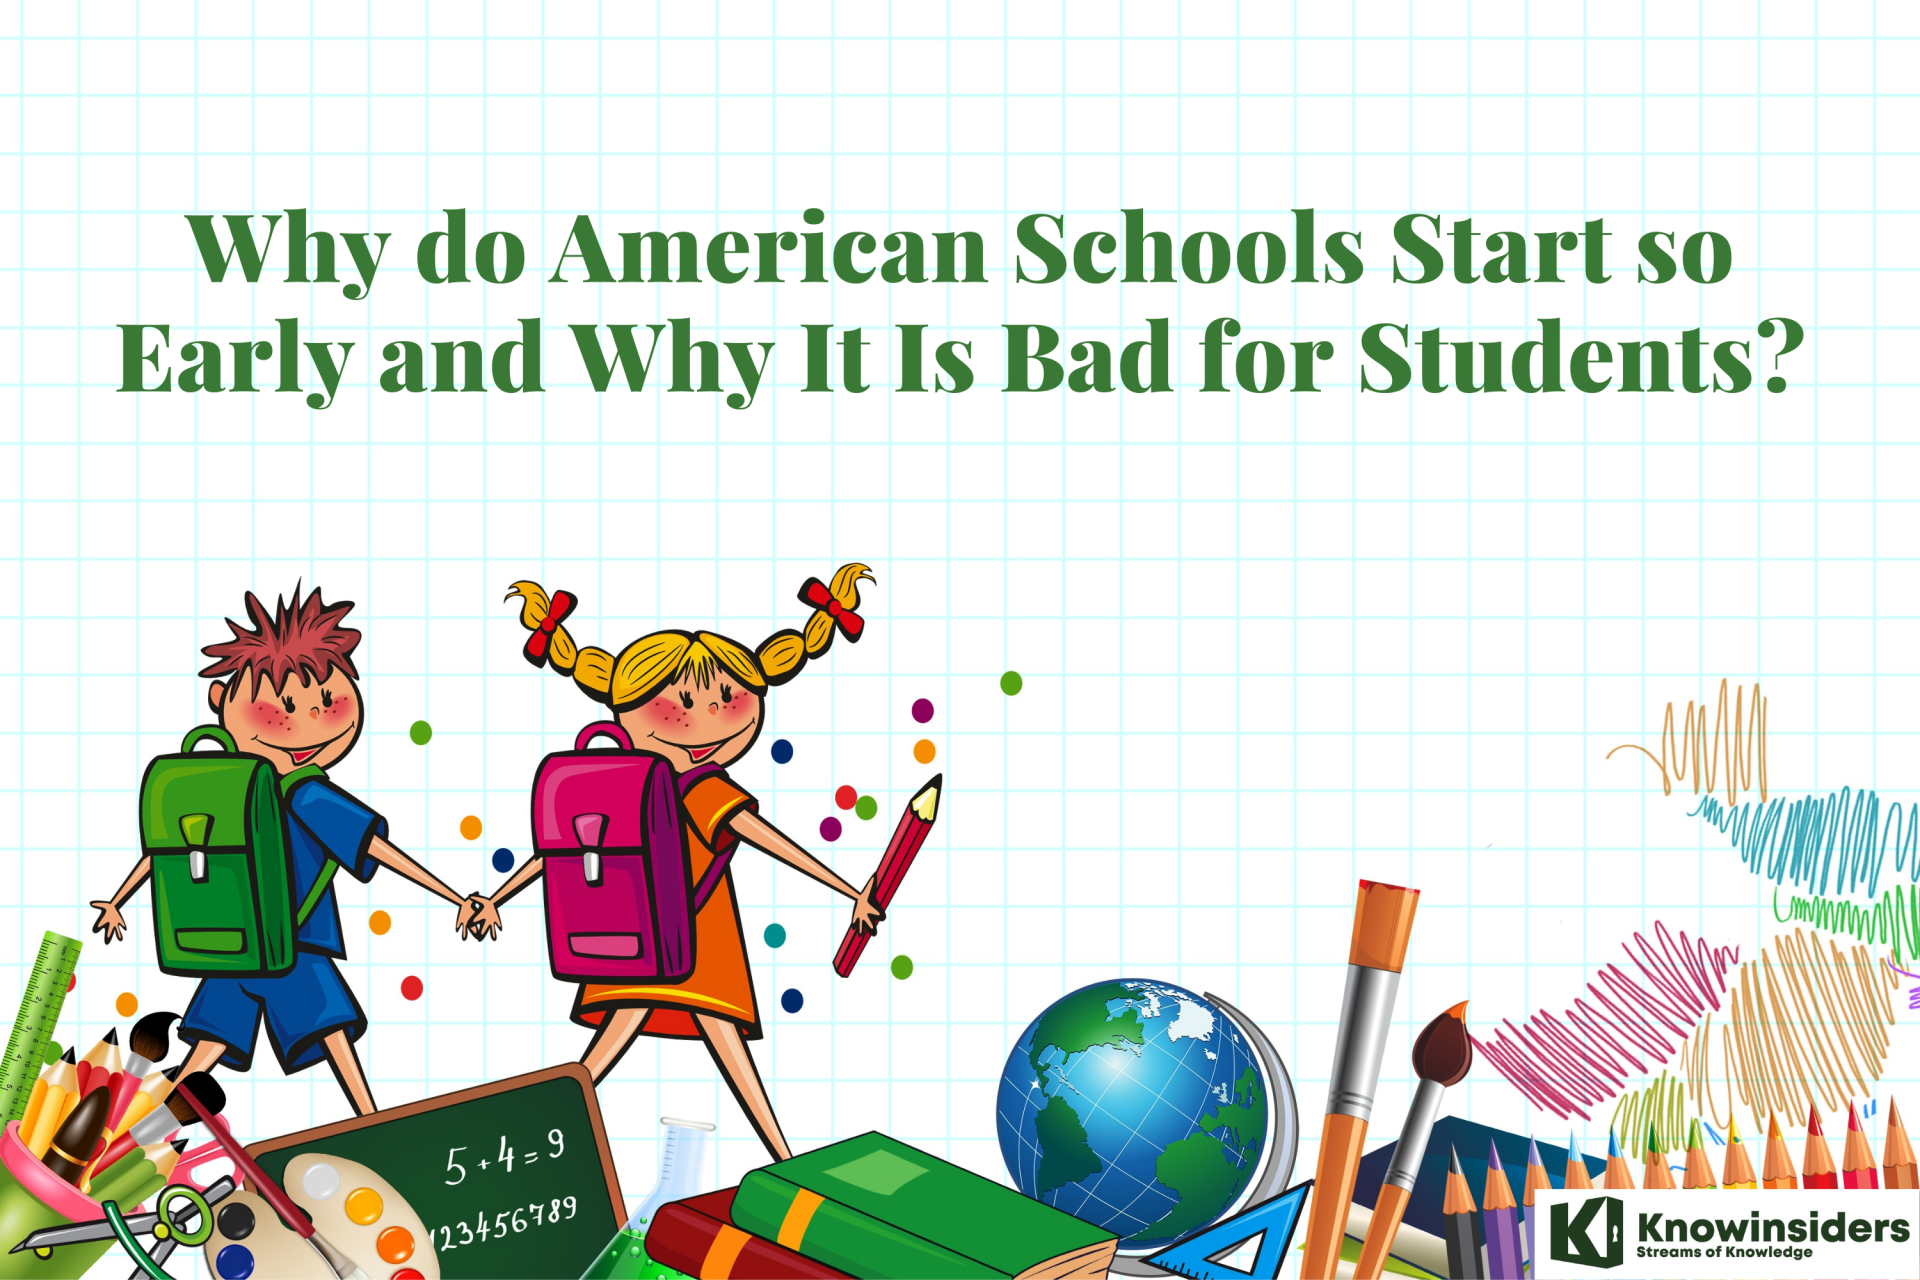 Why do American Schools Start so Early and Why It Is Bad for Students?